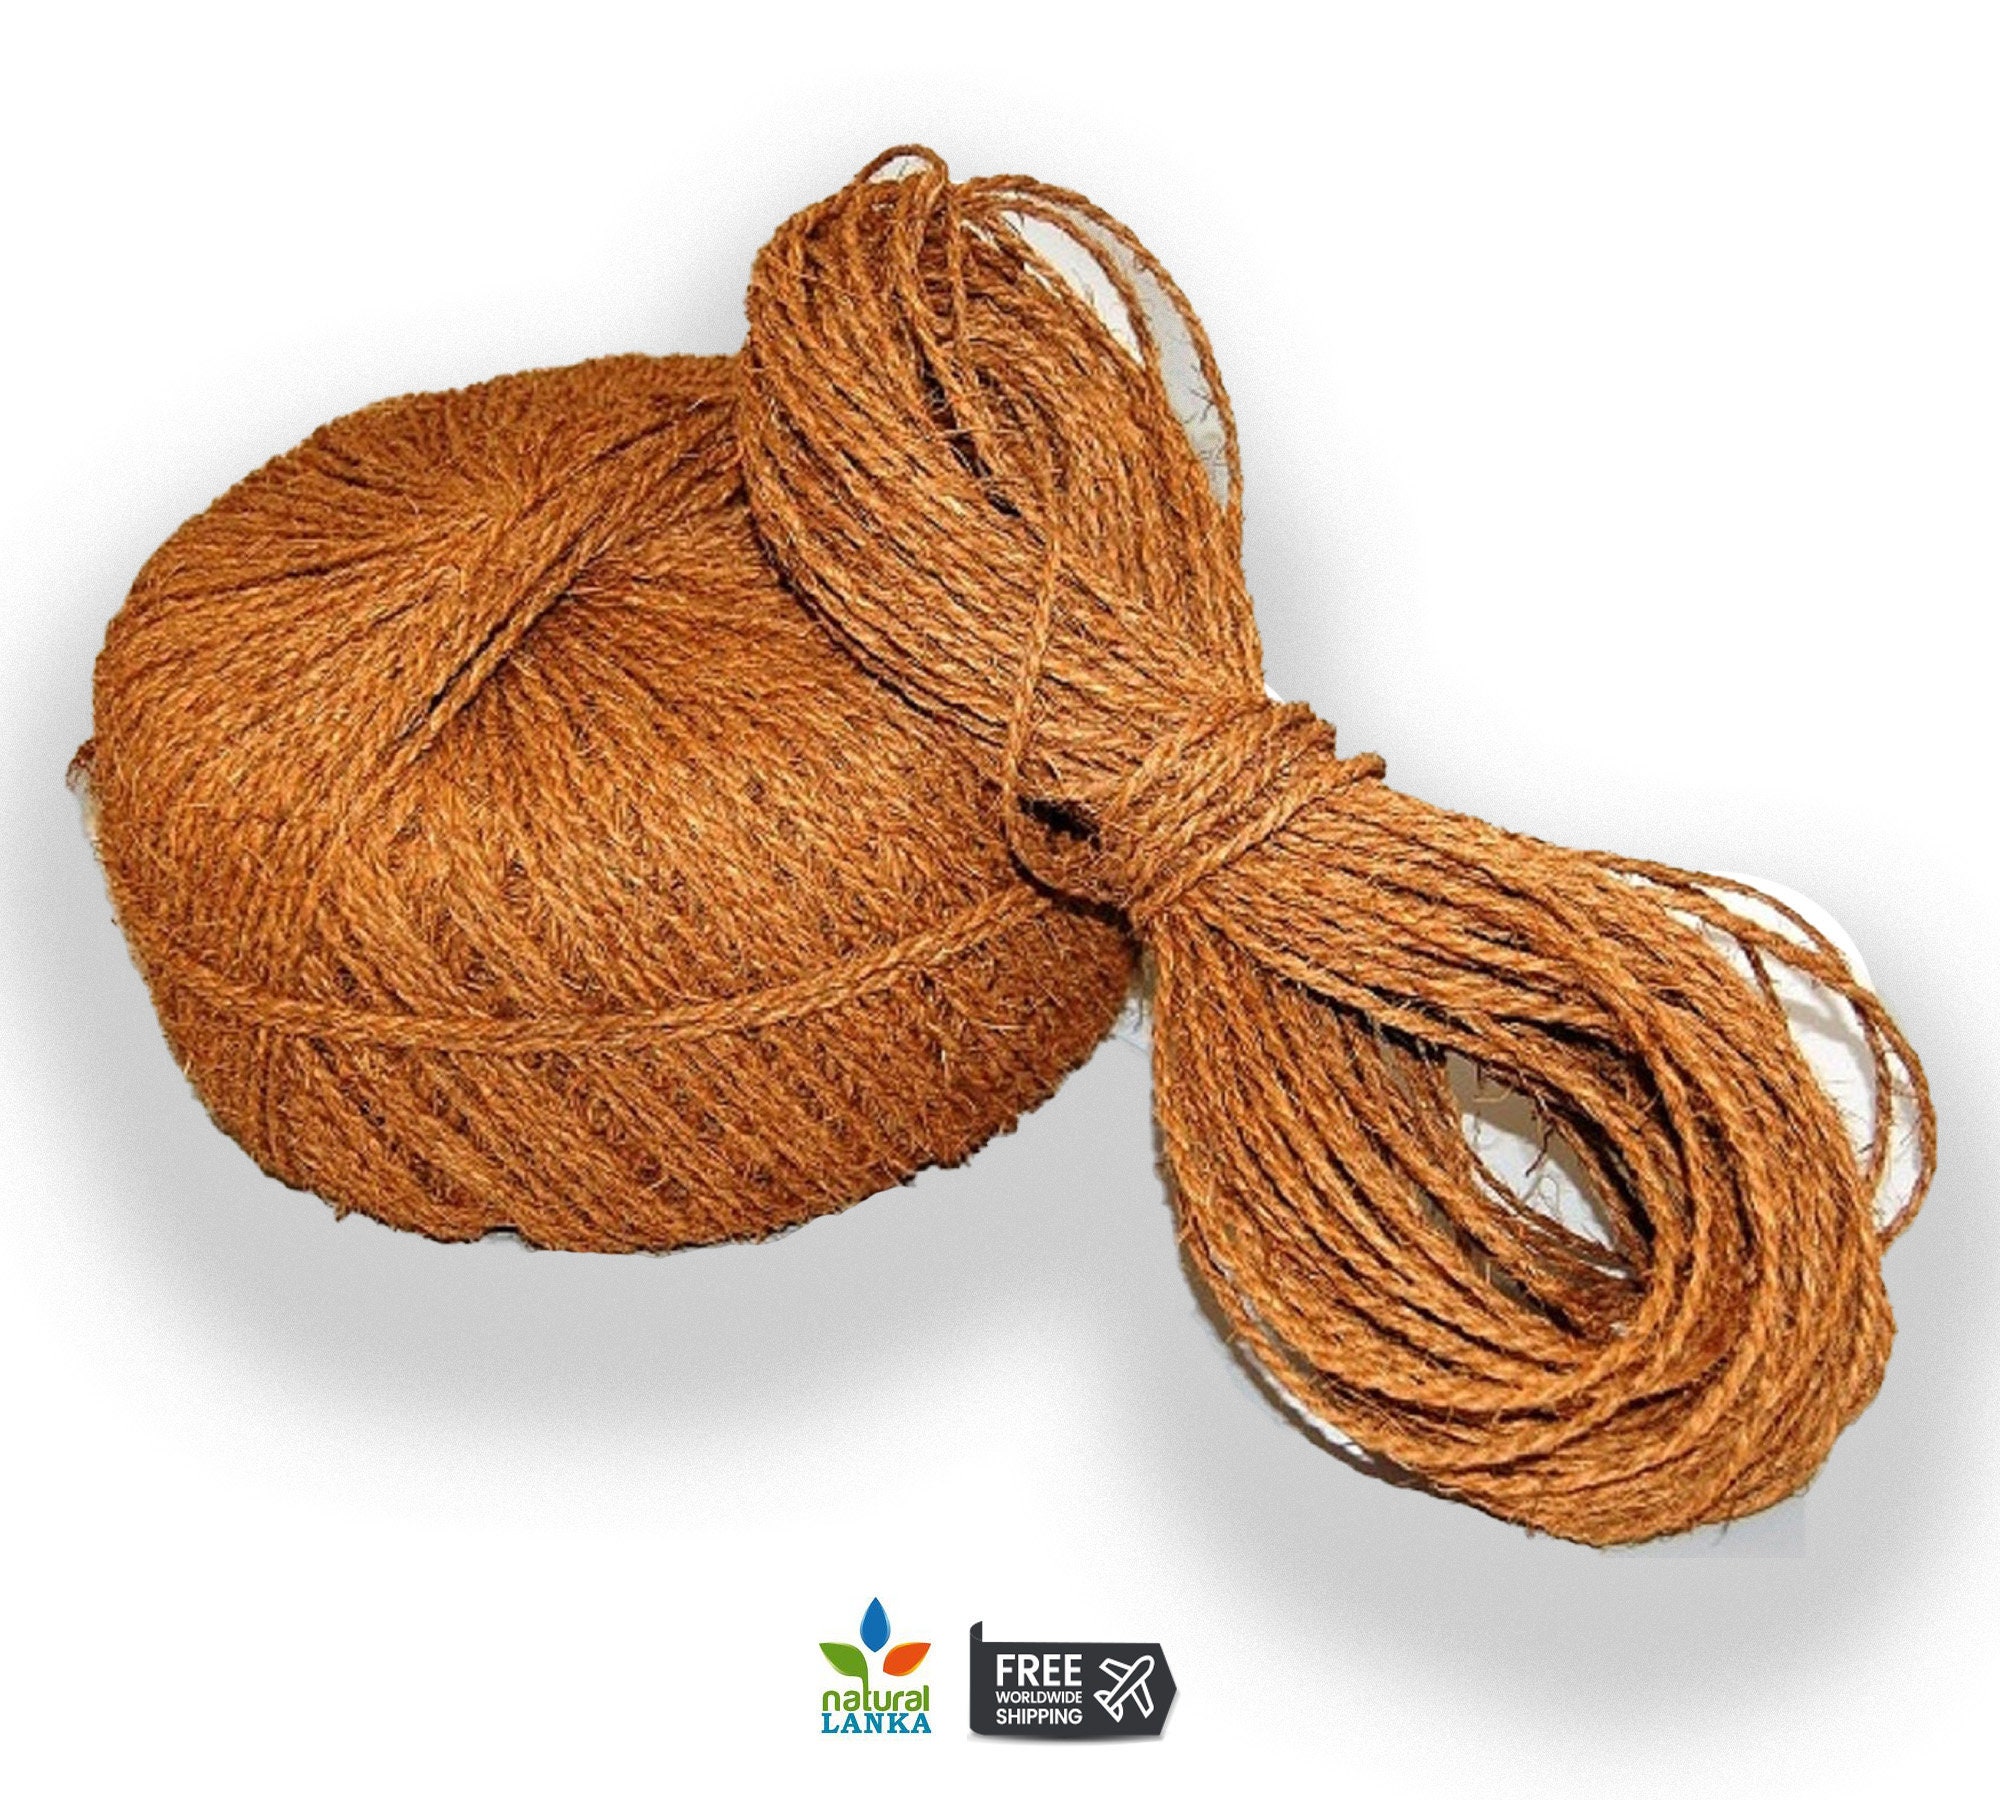 COCO TWIN Coconut Fiber Rope Coconut Rope for Baskets, Mats